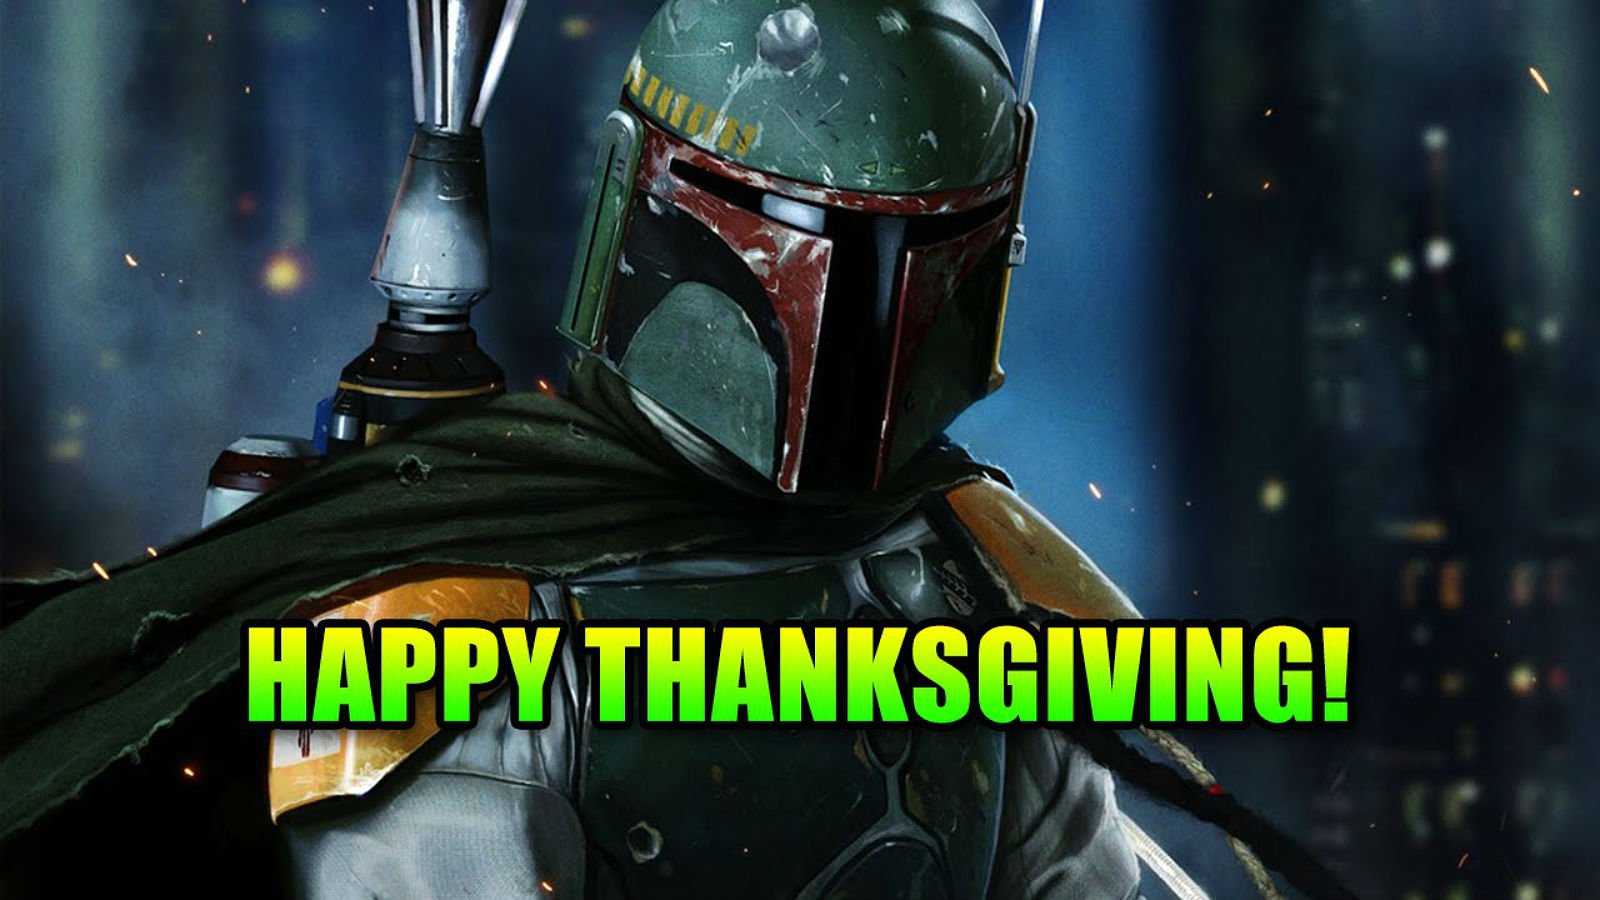 star, Wars, Sci fi, Action, Fighting, Futuristic, Series, Adventure, Disney, Poster, Thanksgiving, Holiday Wallpaper